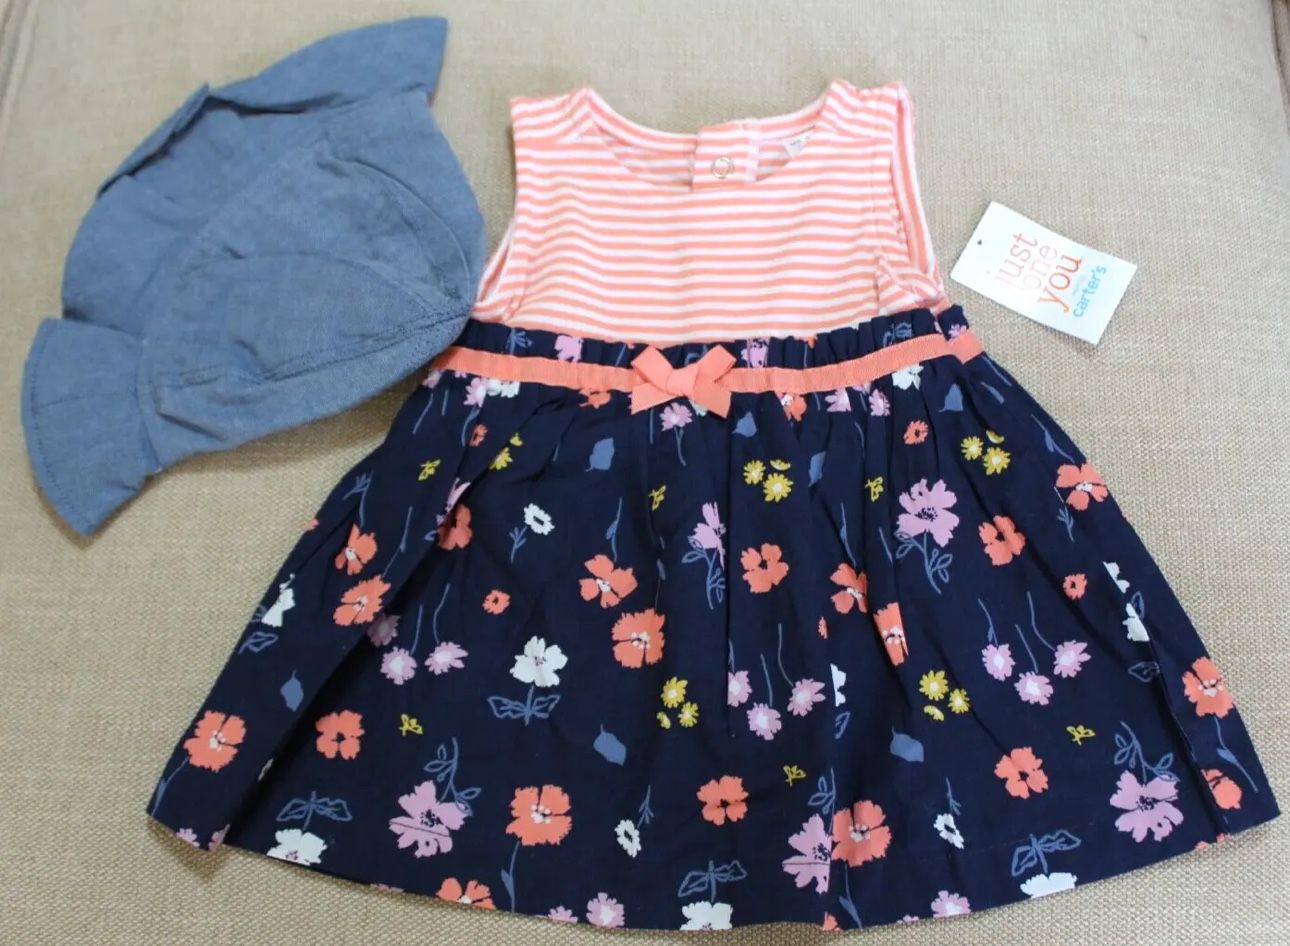 NEW Carter's Baby Girls Summer Dress + Hat Size 6M Pink Stripe Flowers NWT